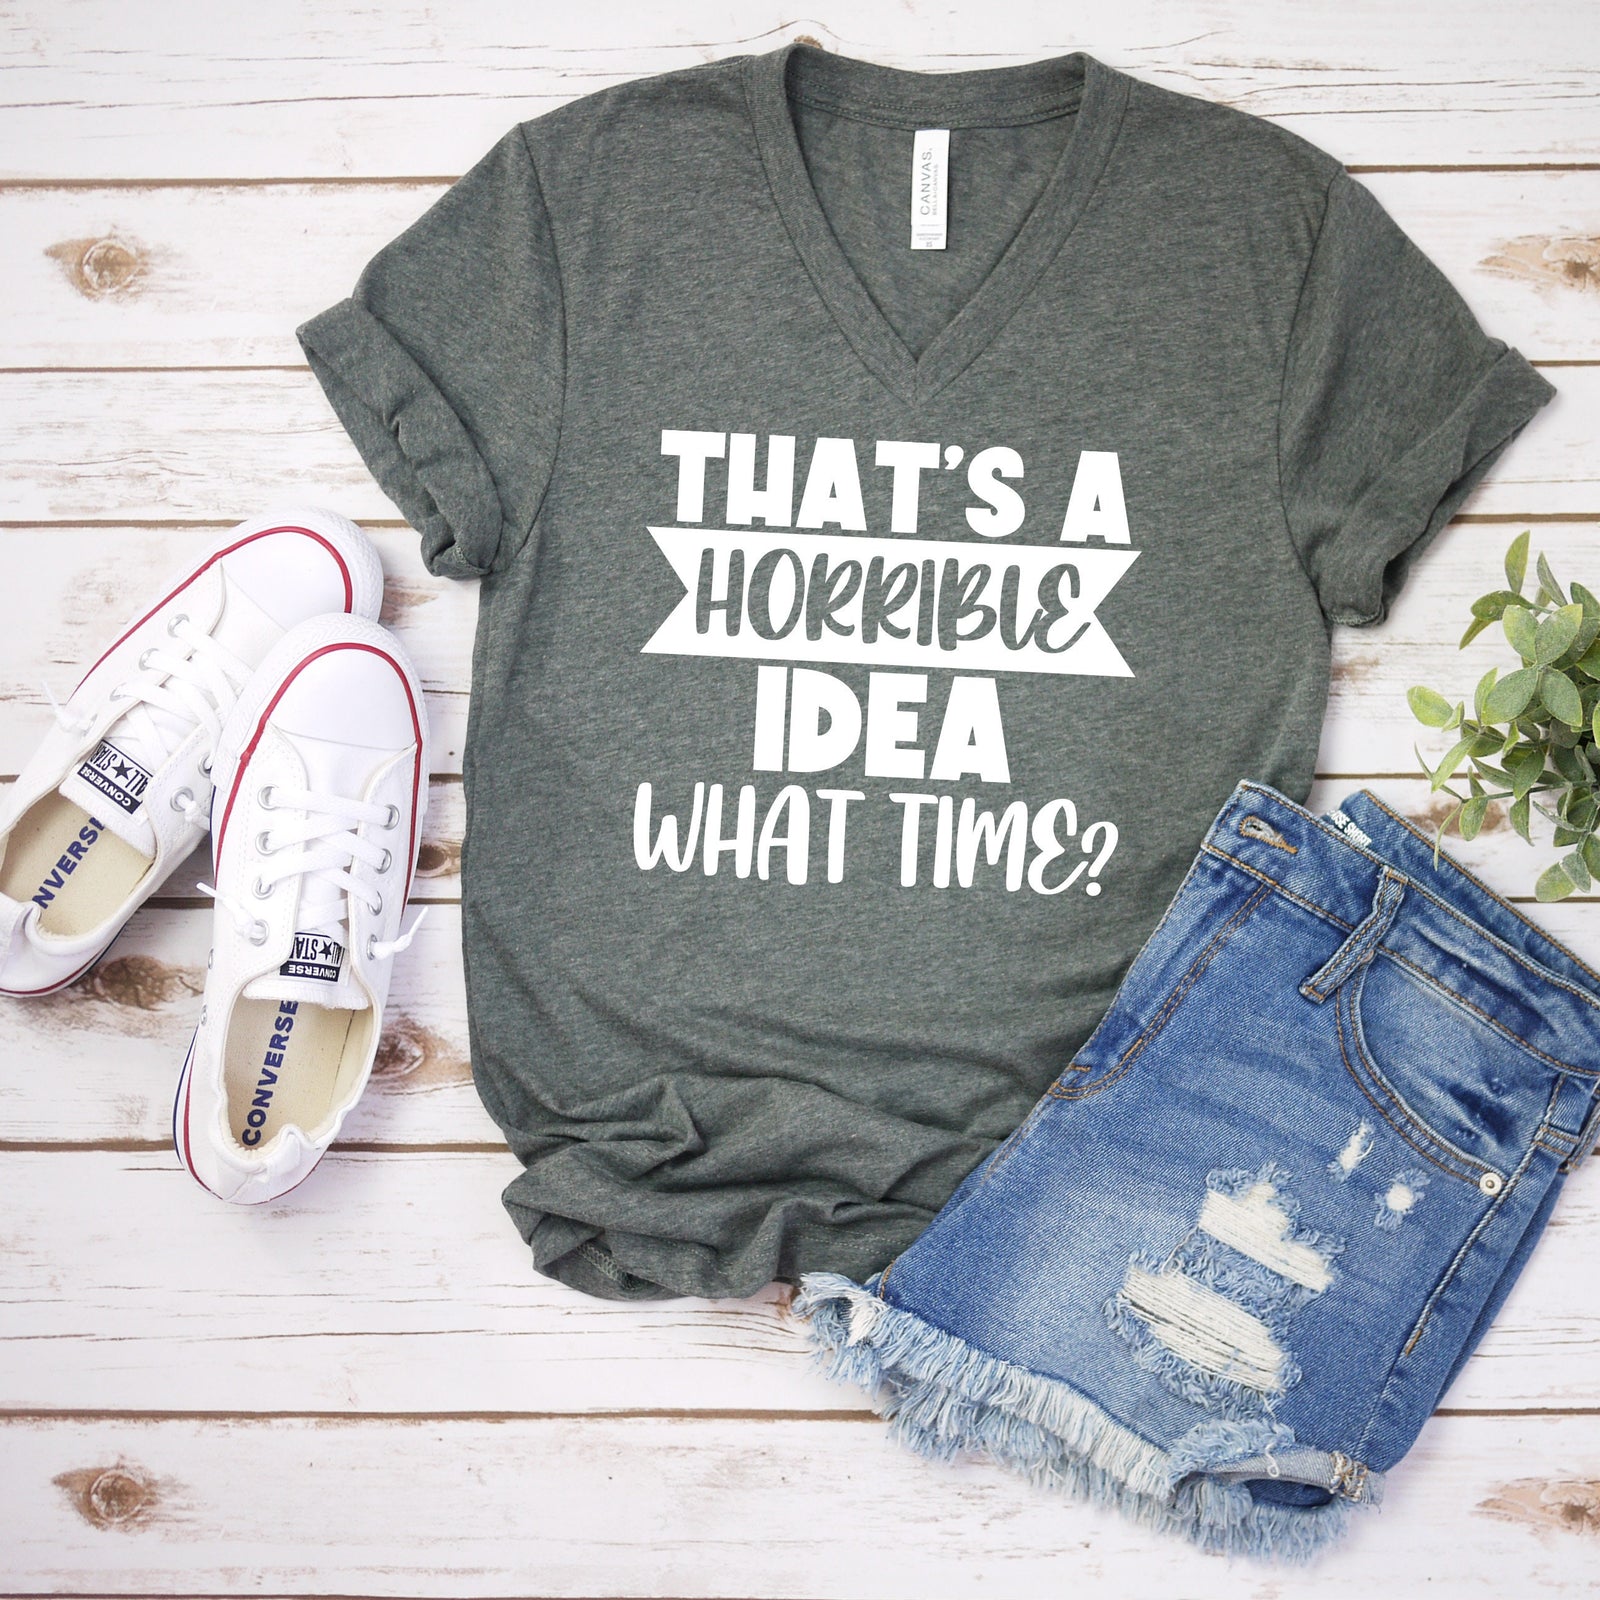 That's A Horrible Idea - What Time? T Shirt - Funny Sarcastic T Shirt - Humor Shirt